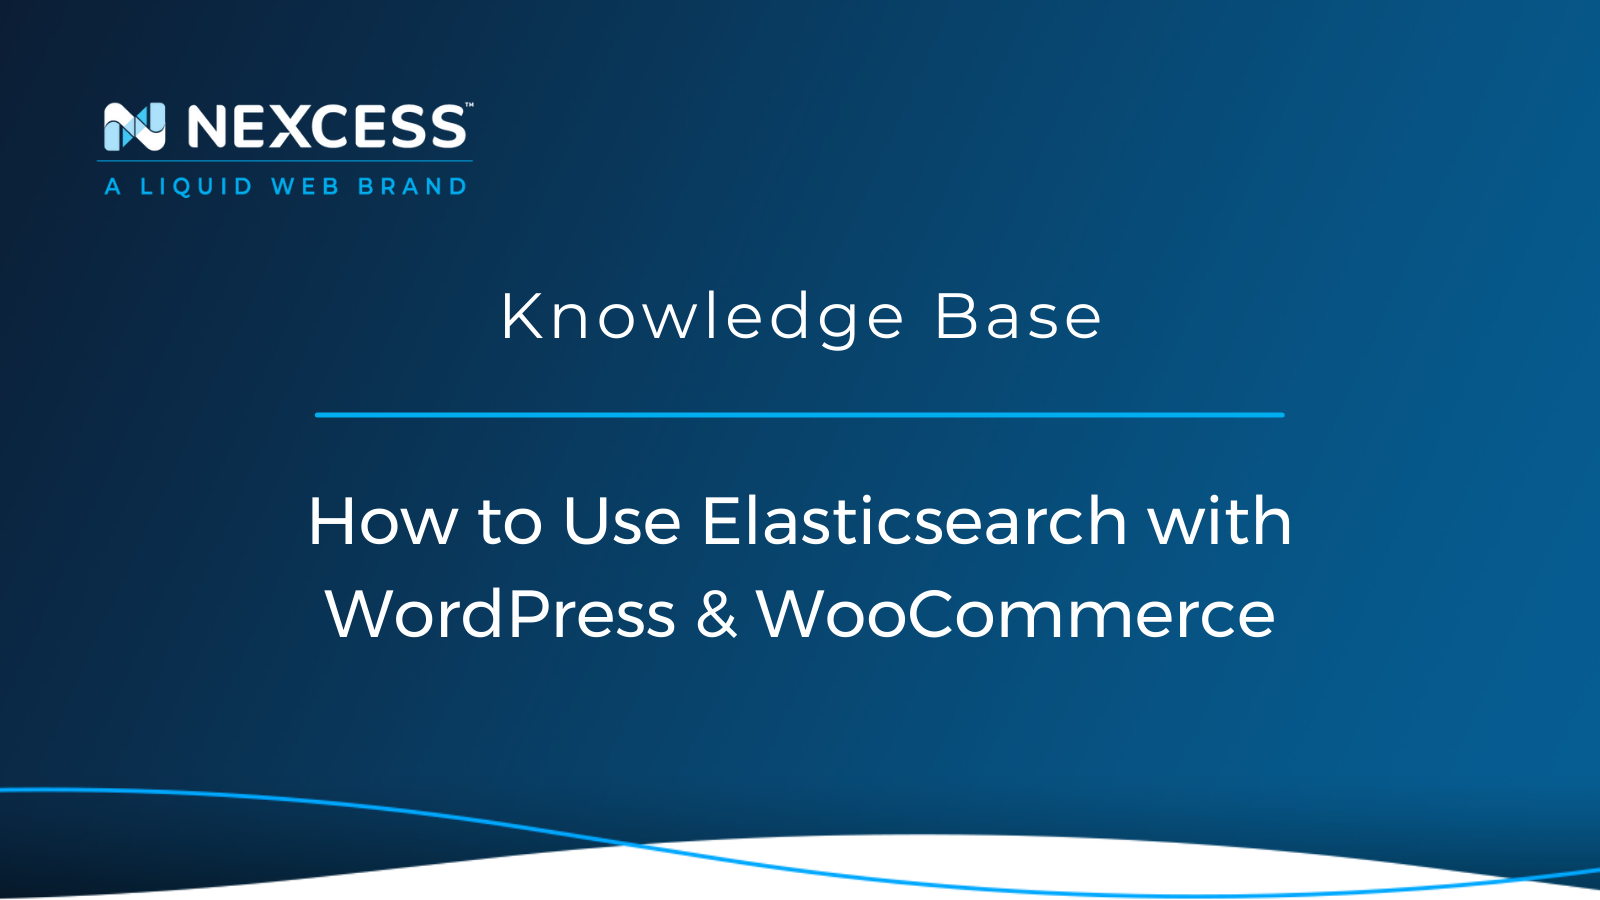 How to Use Elasticsearch with WordPress & WooCommerce